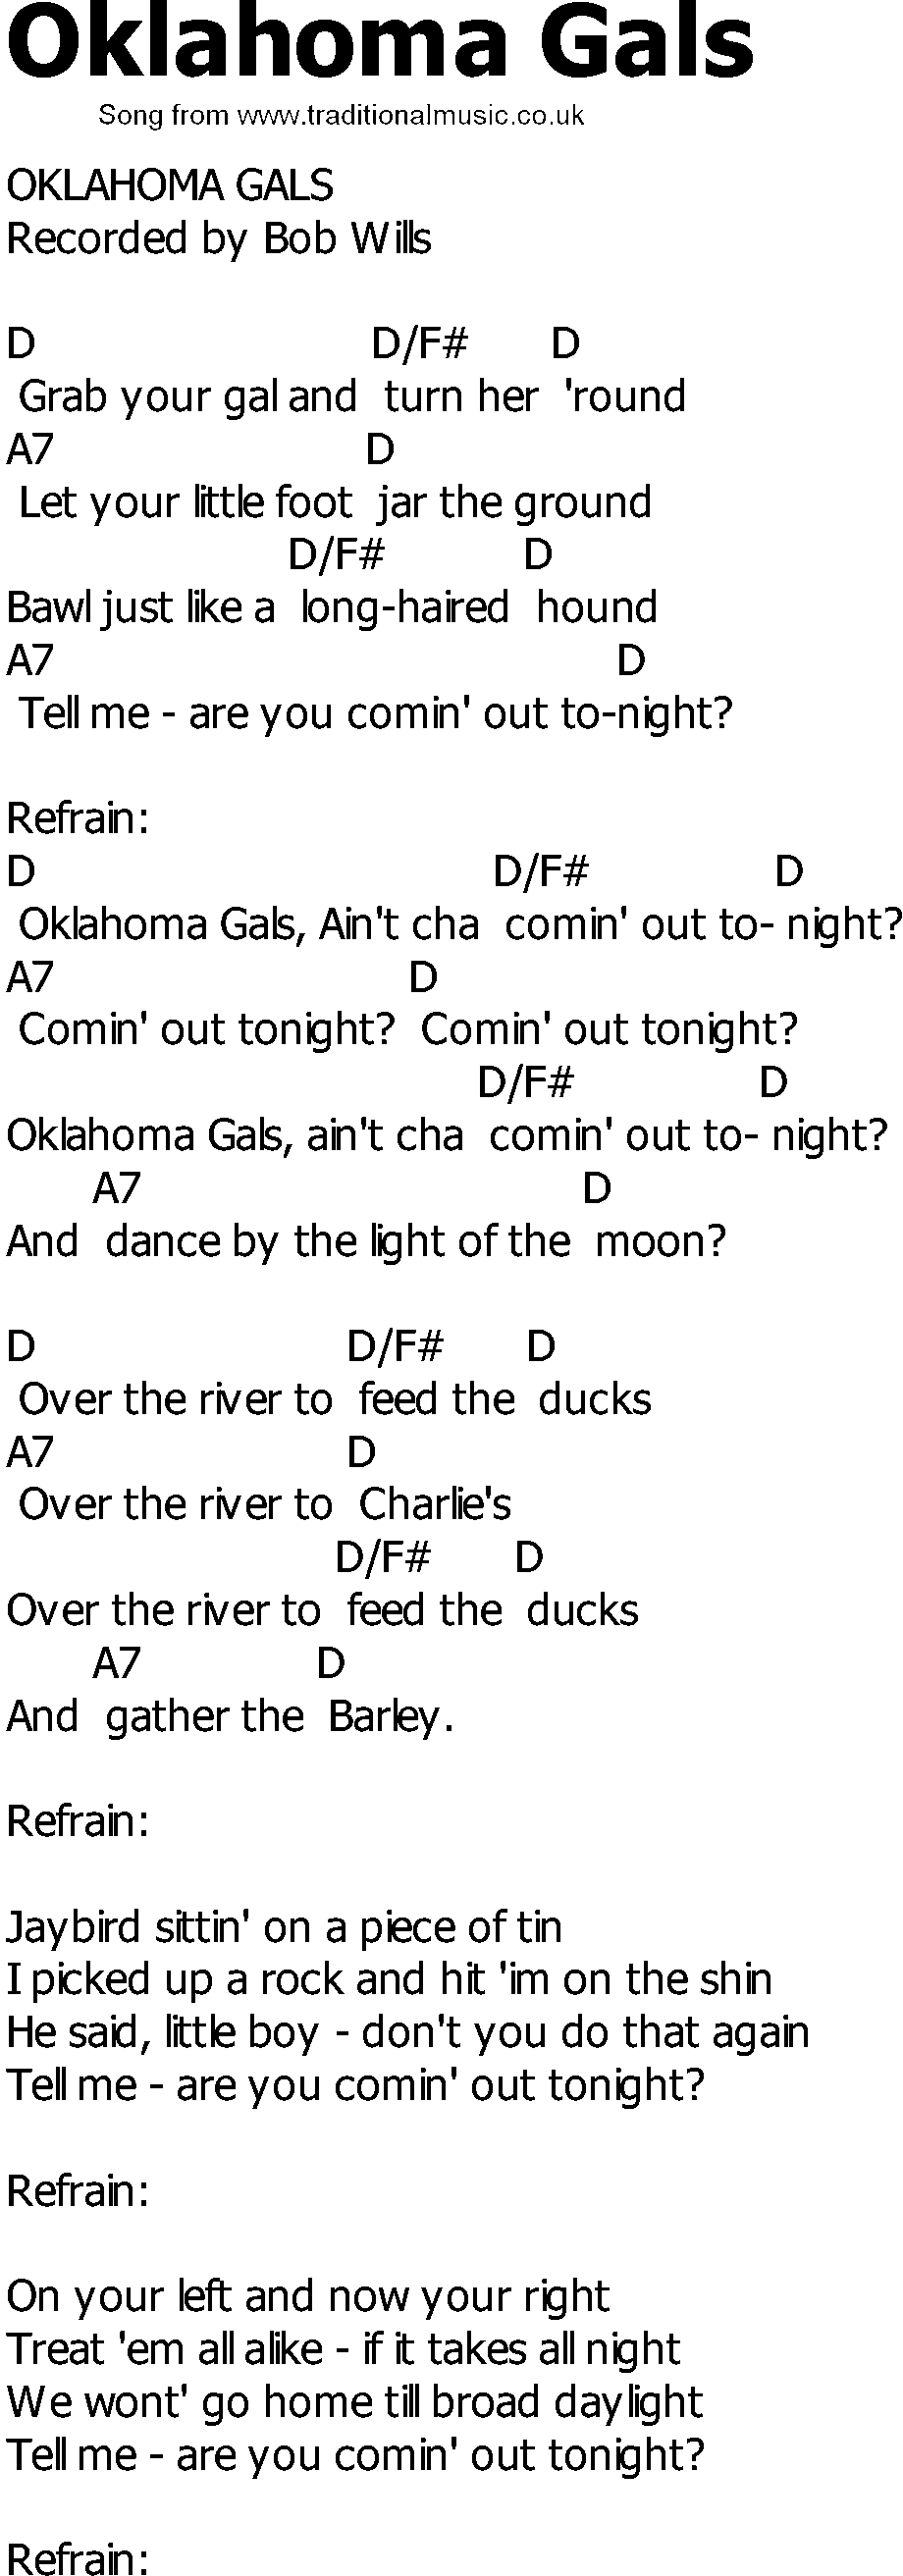 Old Country song lyrics with chords - Oklahoma Gals